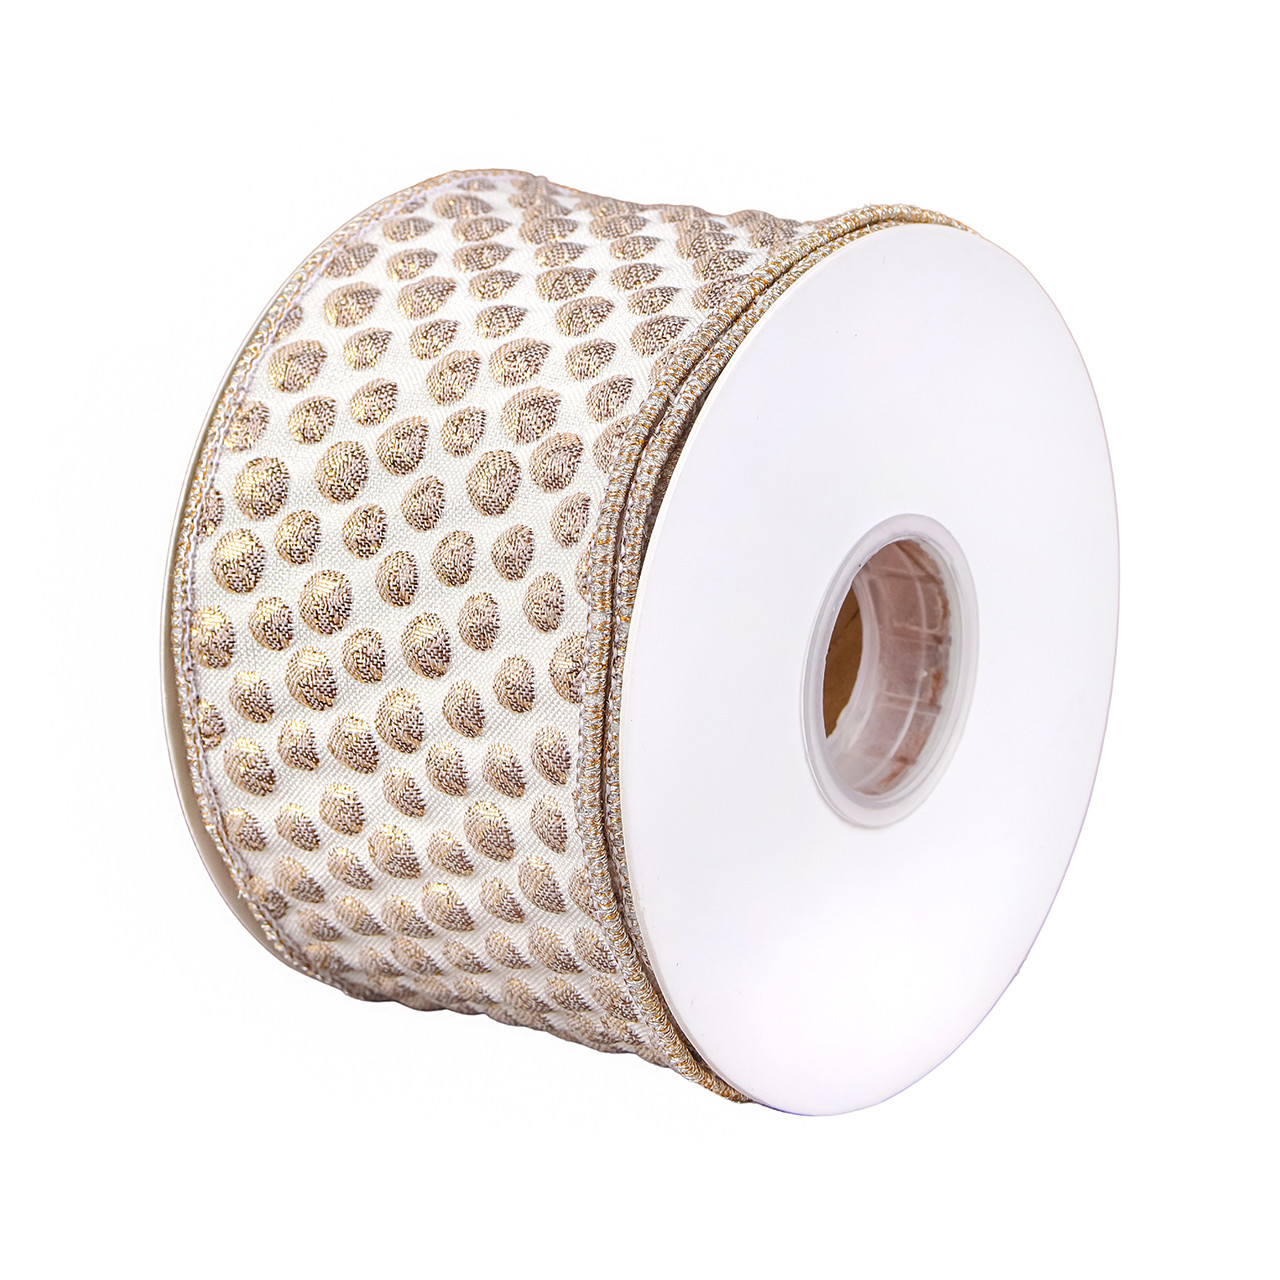 National Tree Company 3 in. x 15 yds. Rainer Jacquard Tissue Back Ribbon, Gold